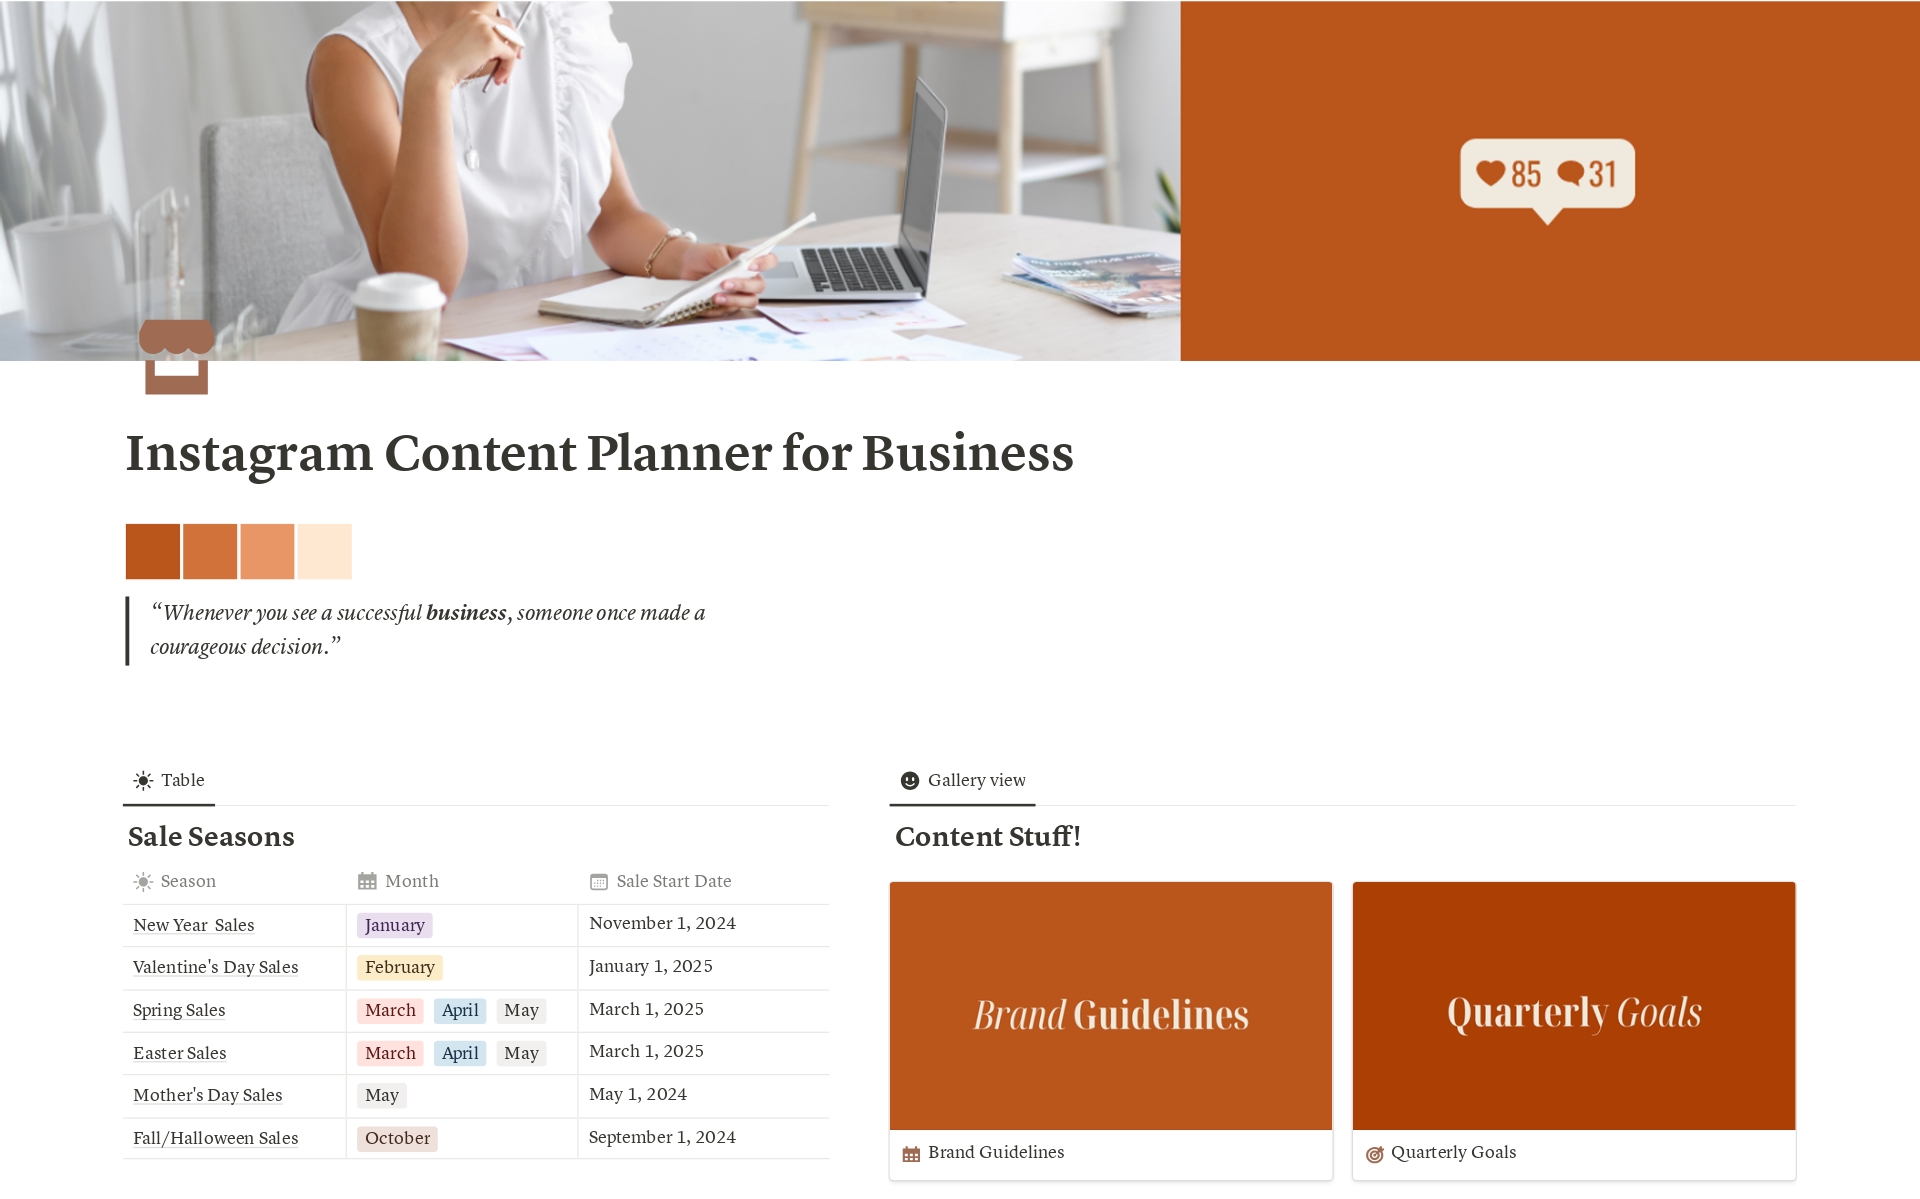 Elevate your business's social media game with our Instagram Content Planner for Business Notion Template!